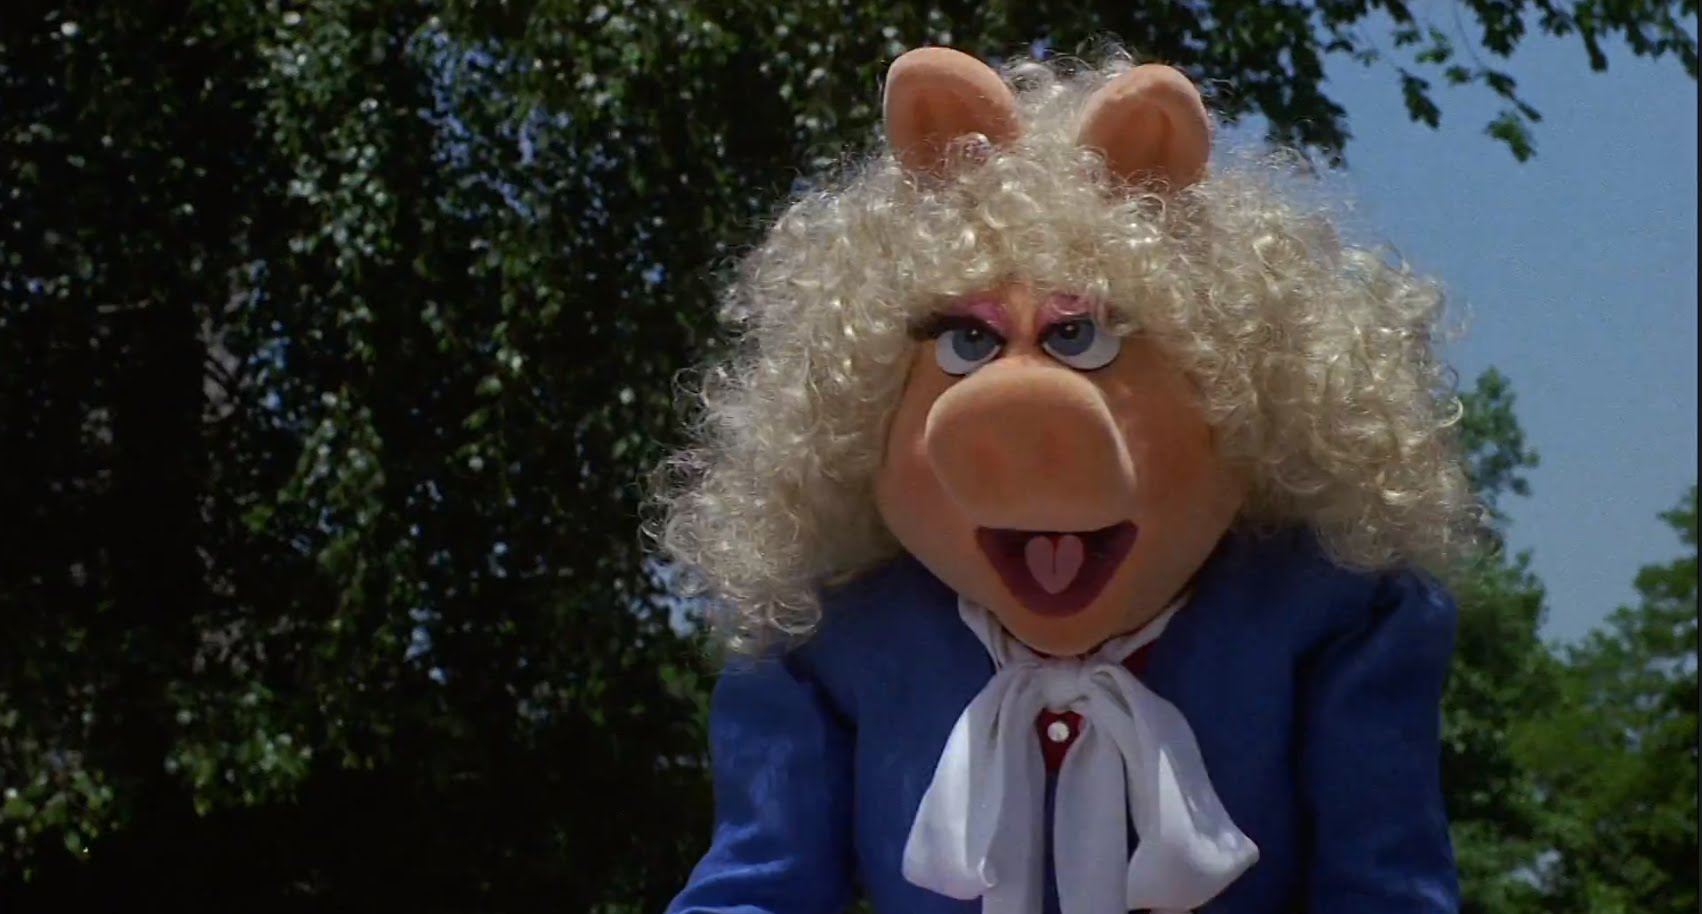 The Muppets: 'Twas Ever Thus